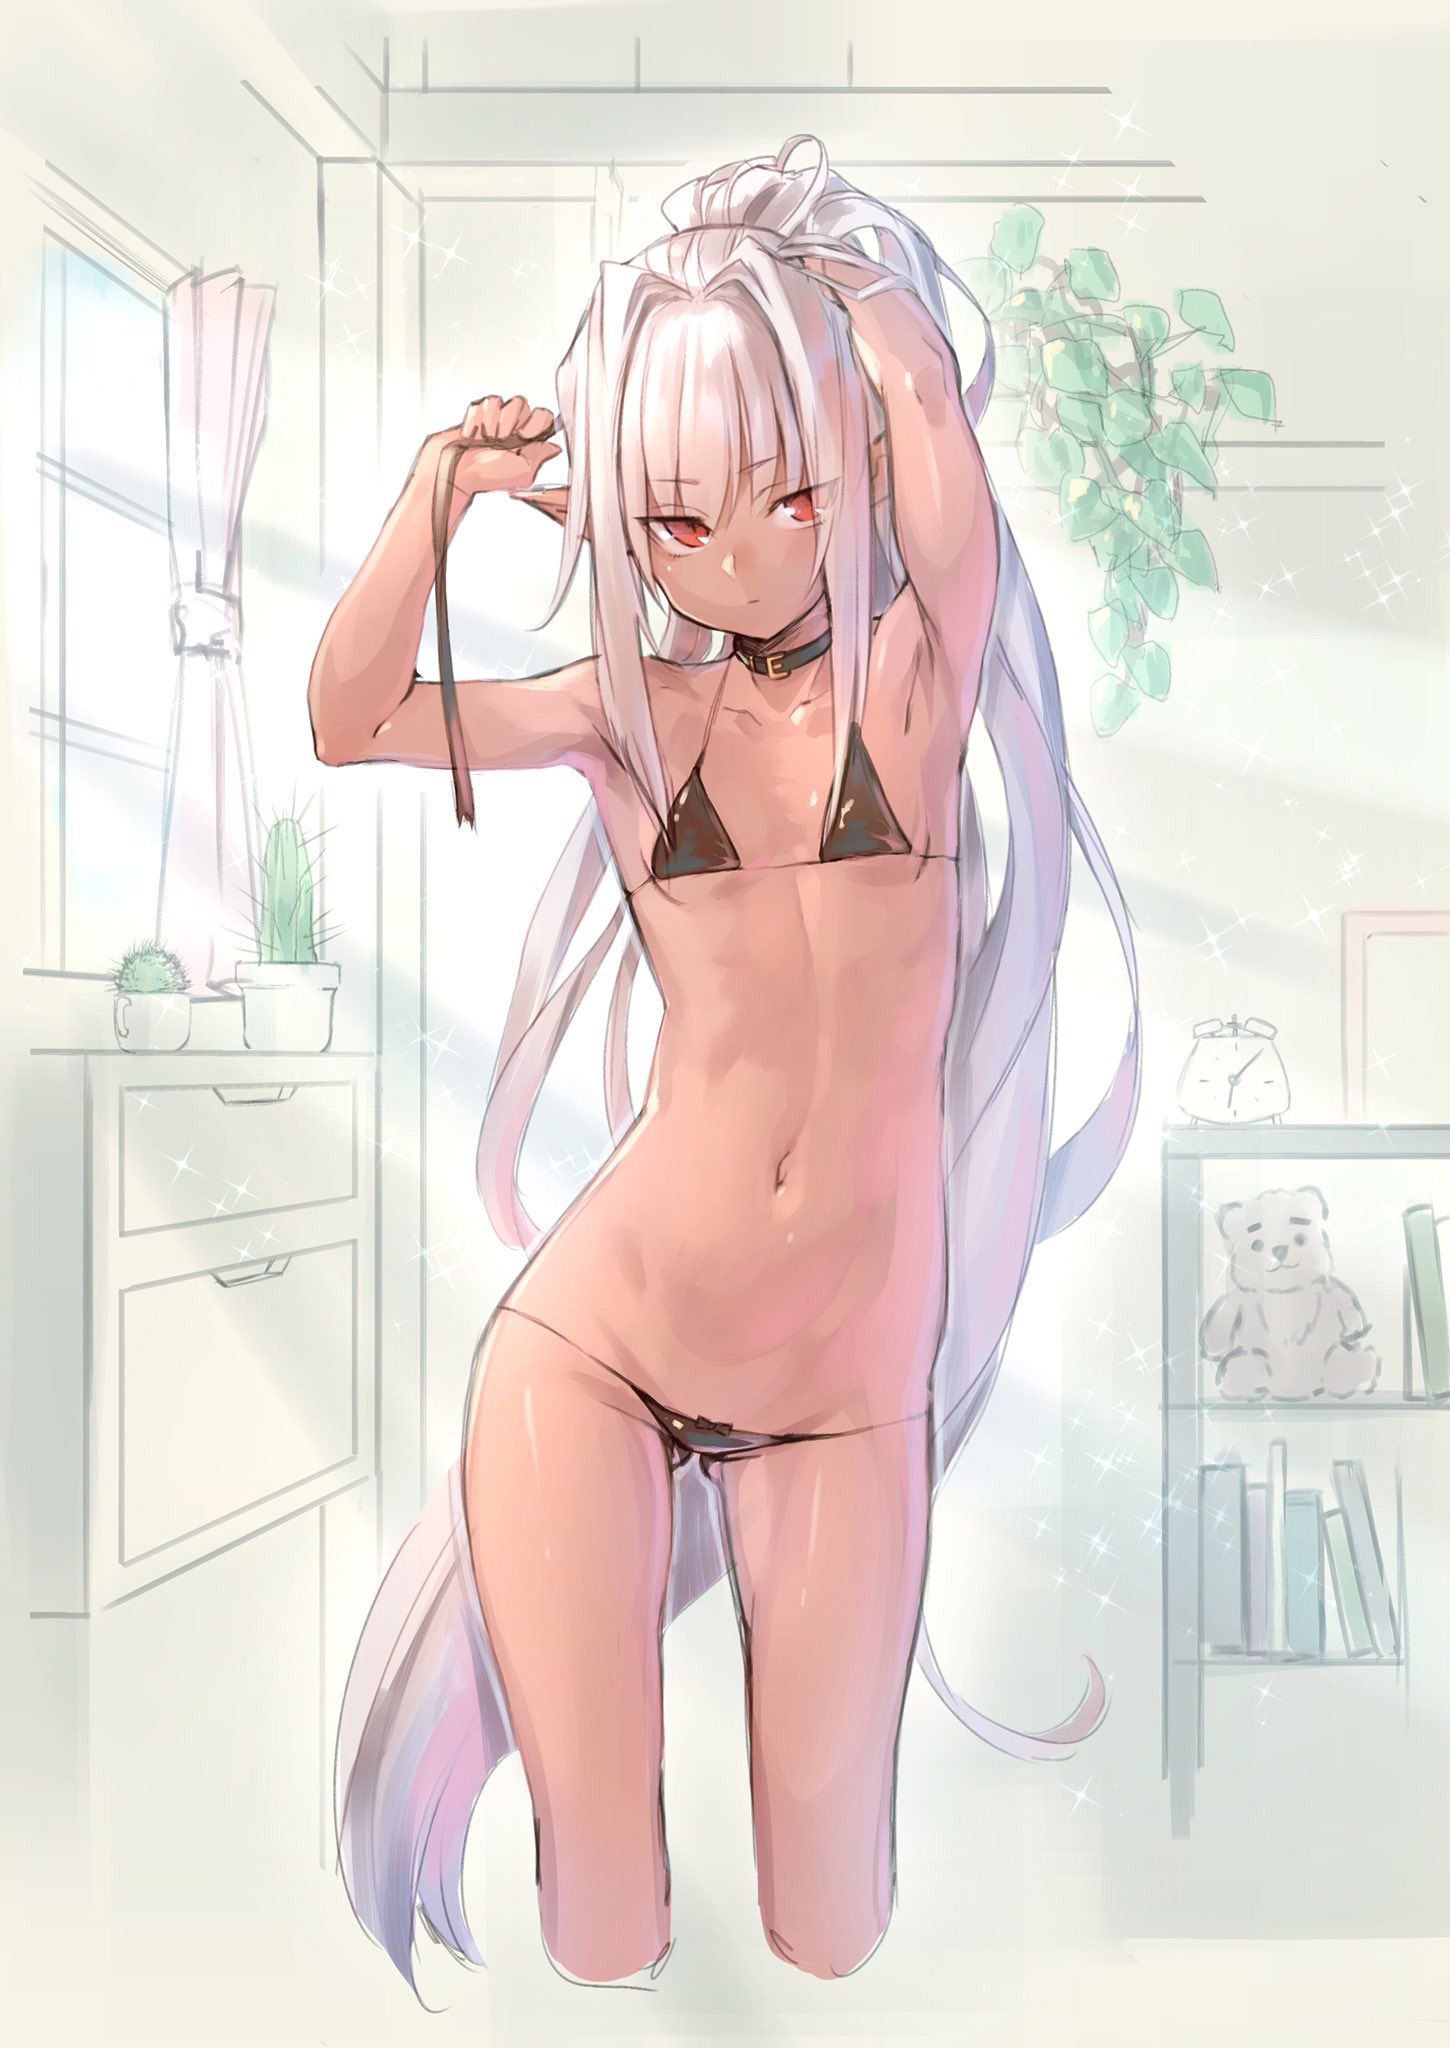 Secondary image of a silver-haired girl that 4 50 photos [Ero/non-erotic] 43